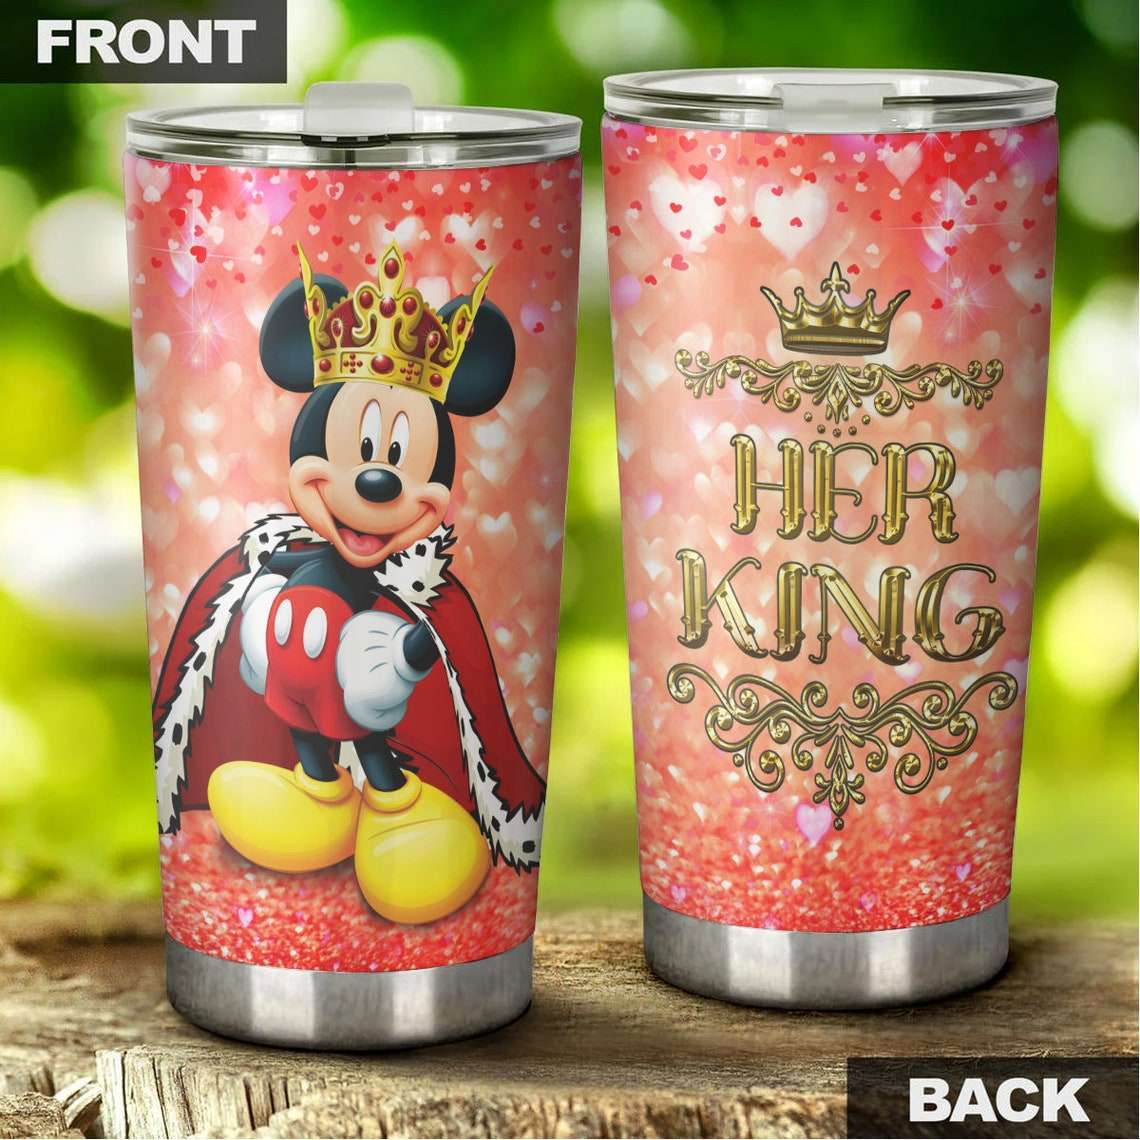 https://musicdope80s.com/wp-content/uploads/2023/02/Cartoon_Movie_Mickey_Mouse_Her_King_Matching_Couple_Stainless_Steel_Tumbler_For_Disney_Fan_gytdnf.jpg